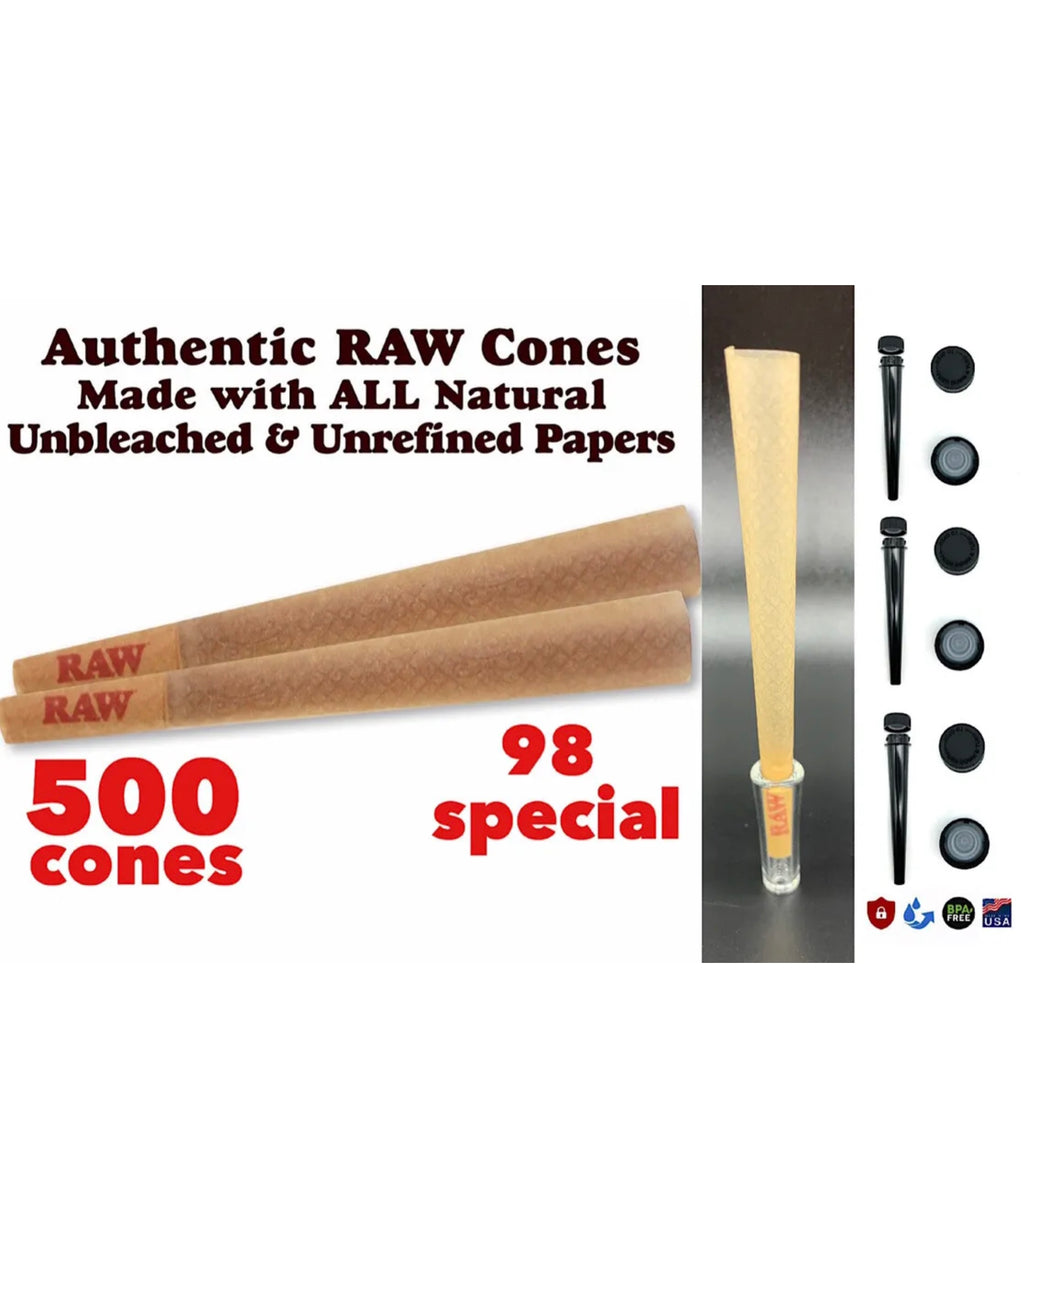 raw cone classic 98 special size pre rolled cone(500 pack)+3pcs tube +glass TIP